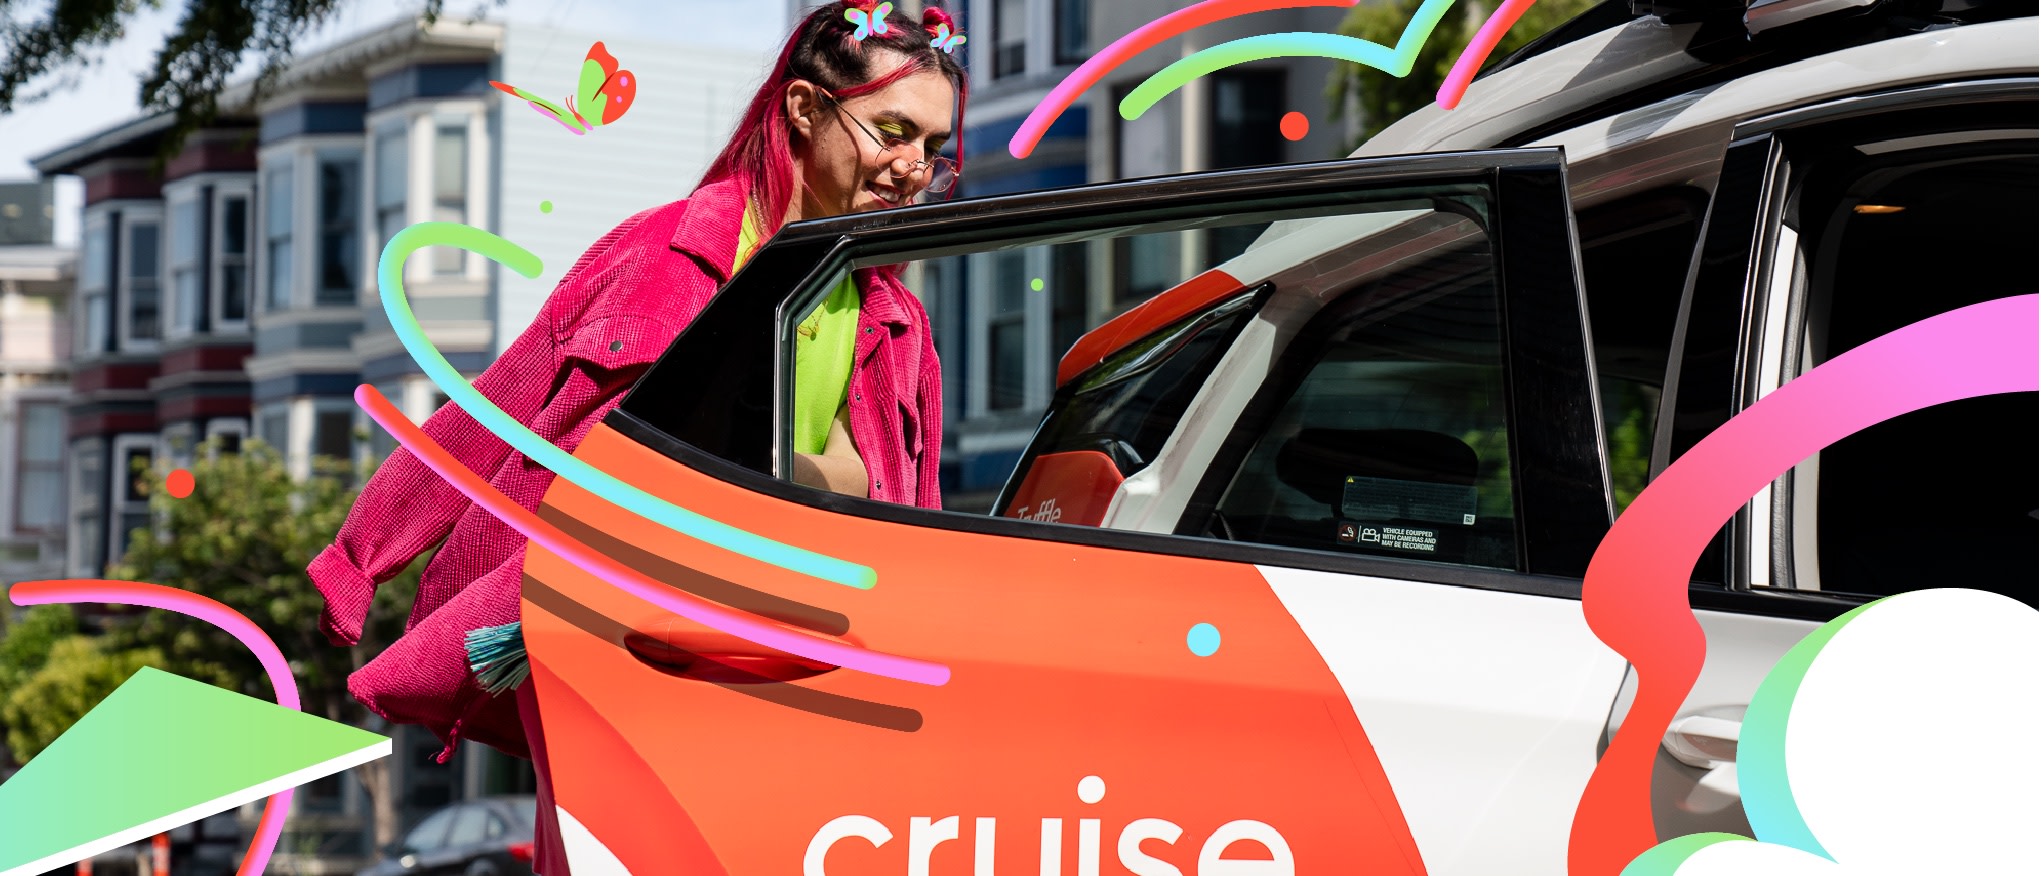 Smiling person entering Cruise driverless car with neon effects